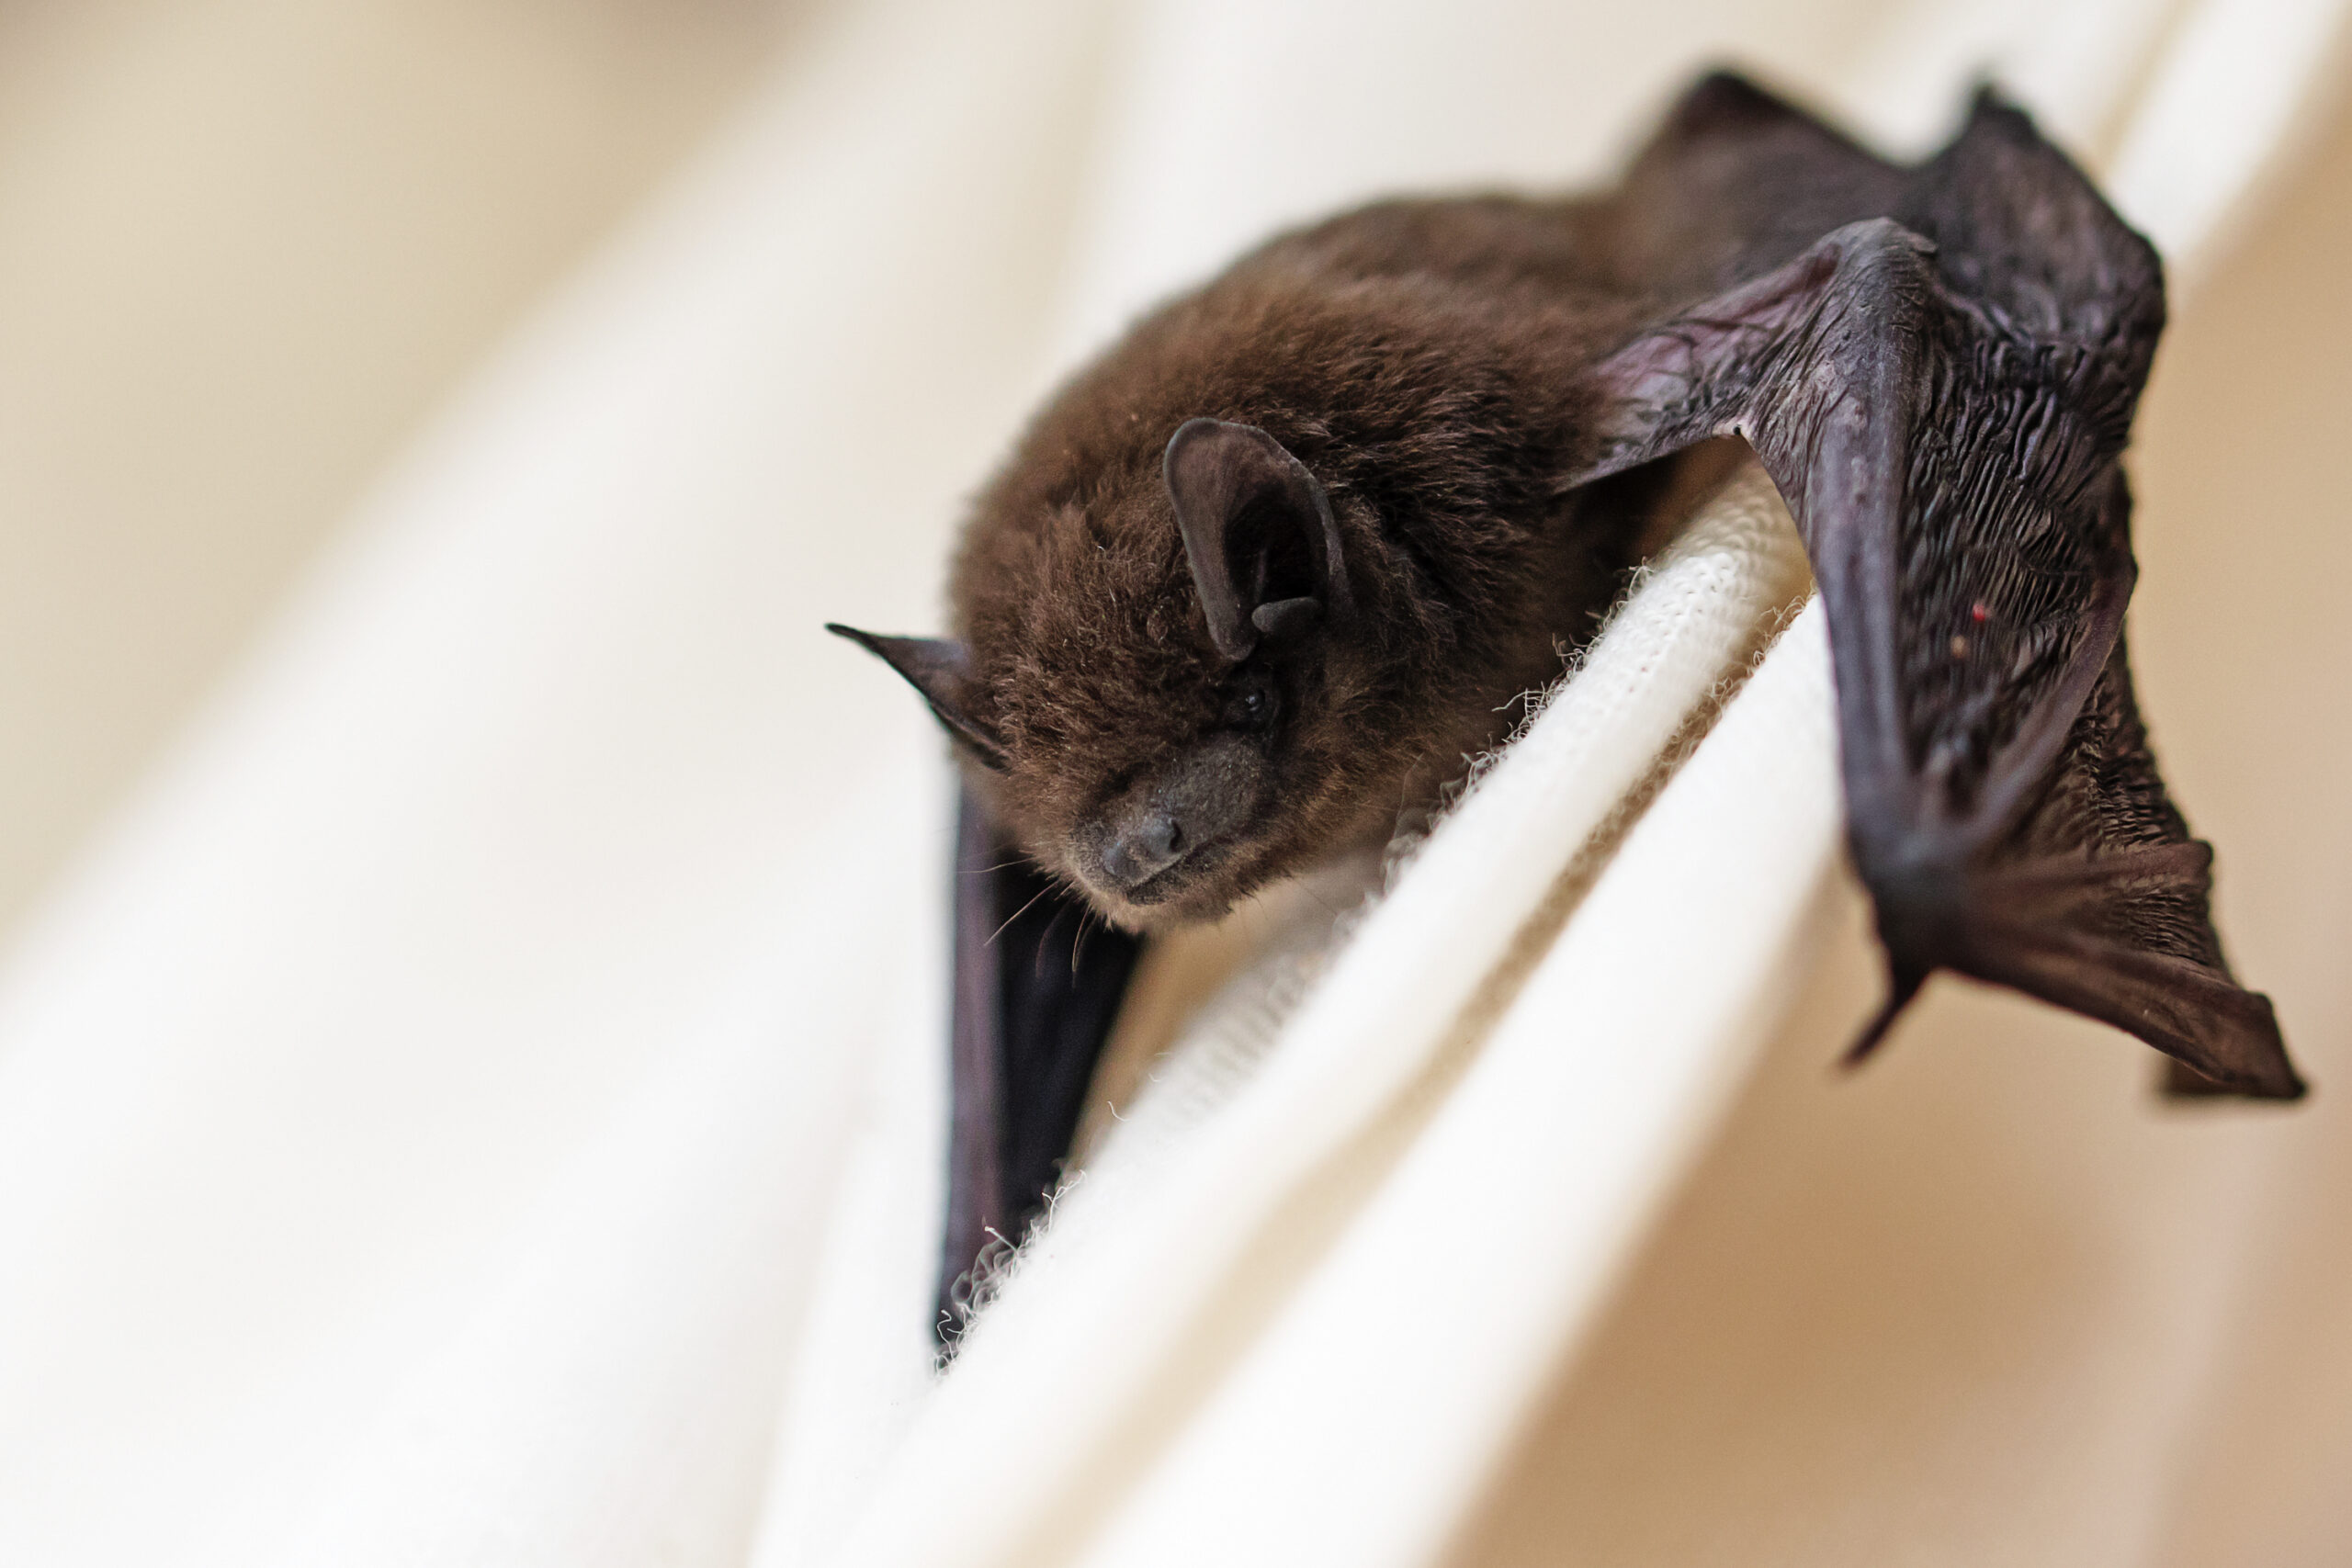 bat removal service provider in South Jersey